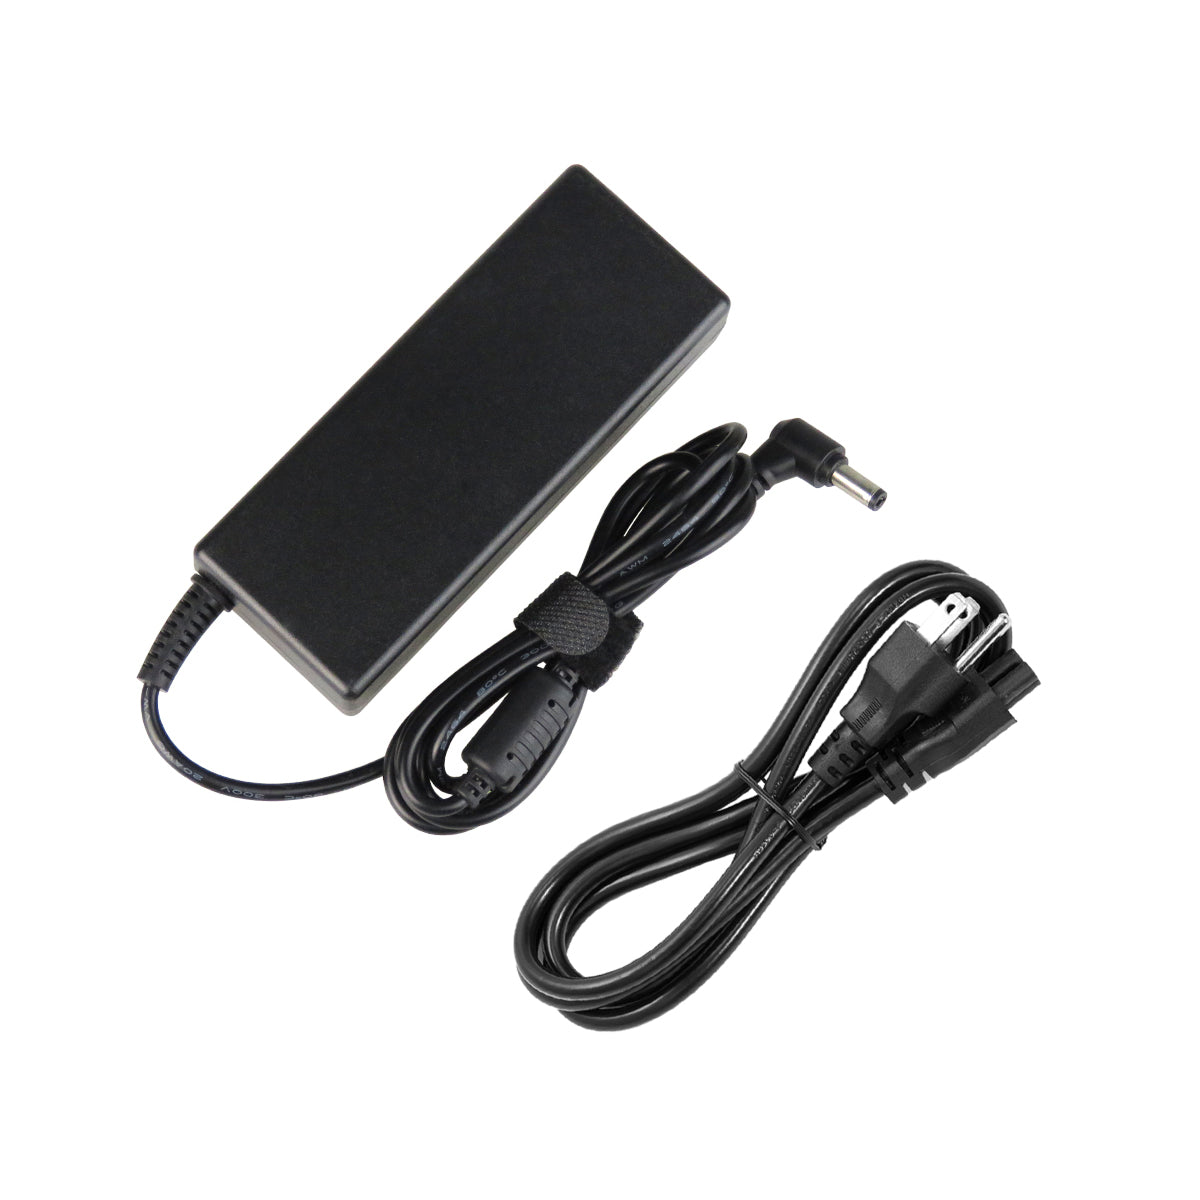 AC Adapter Charger for ASUS ul50ag Series Notebook.